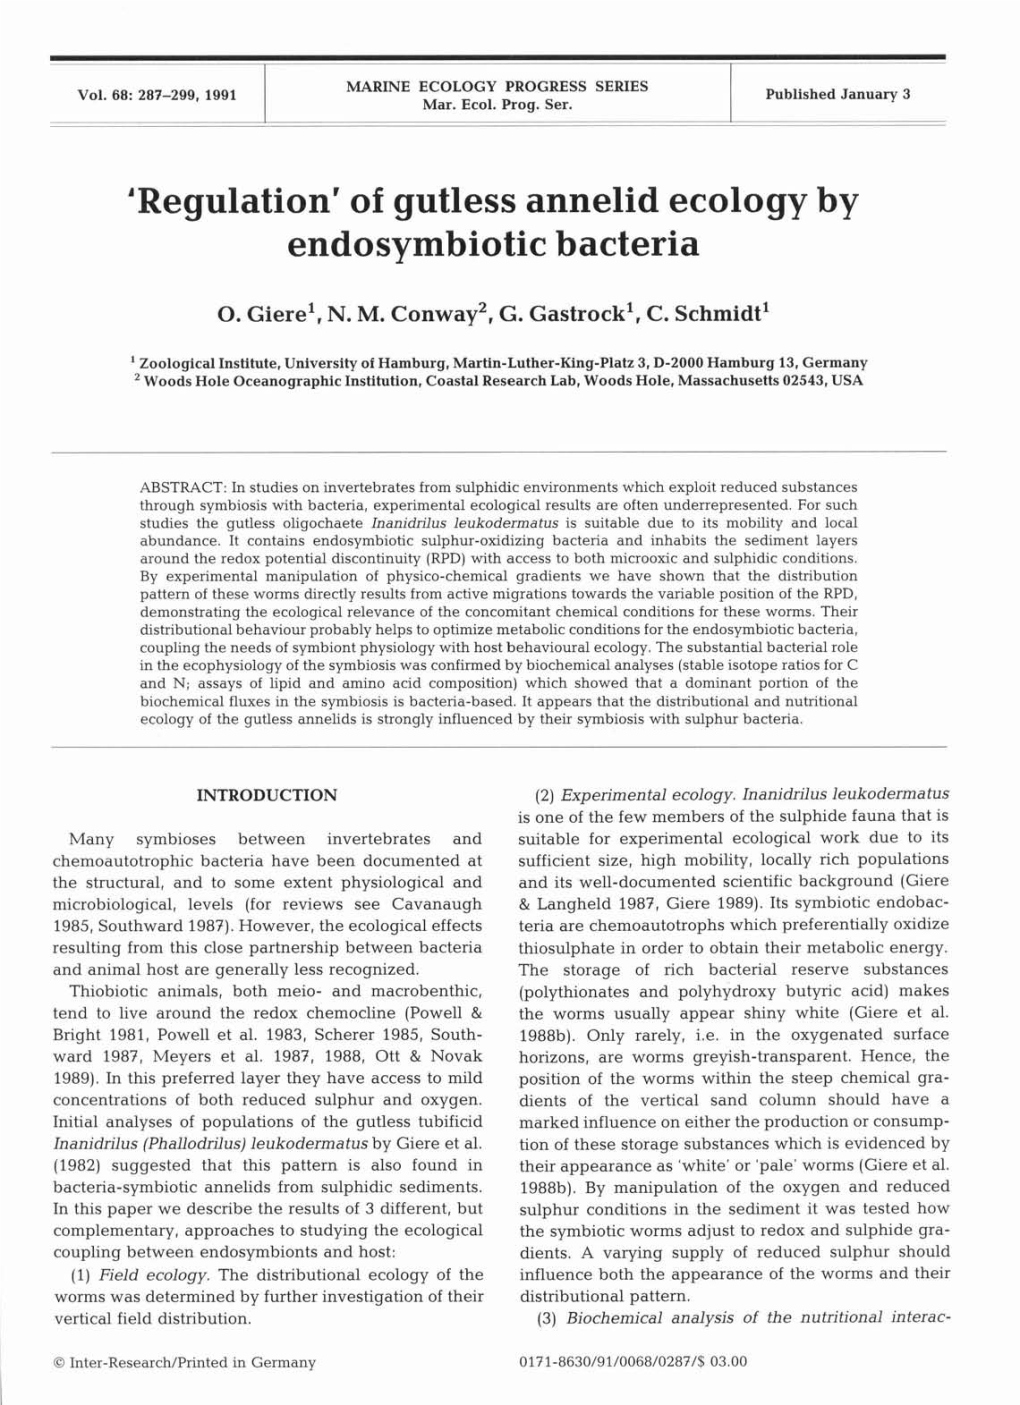 'Regulation' of Gutless Annelid Ecology by Endosymbiotic Bacteria